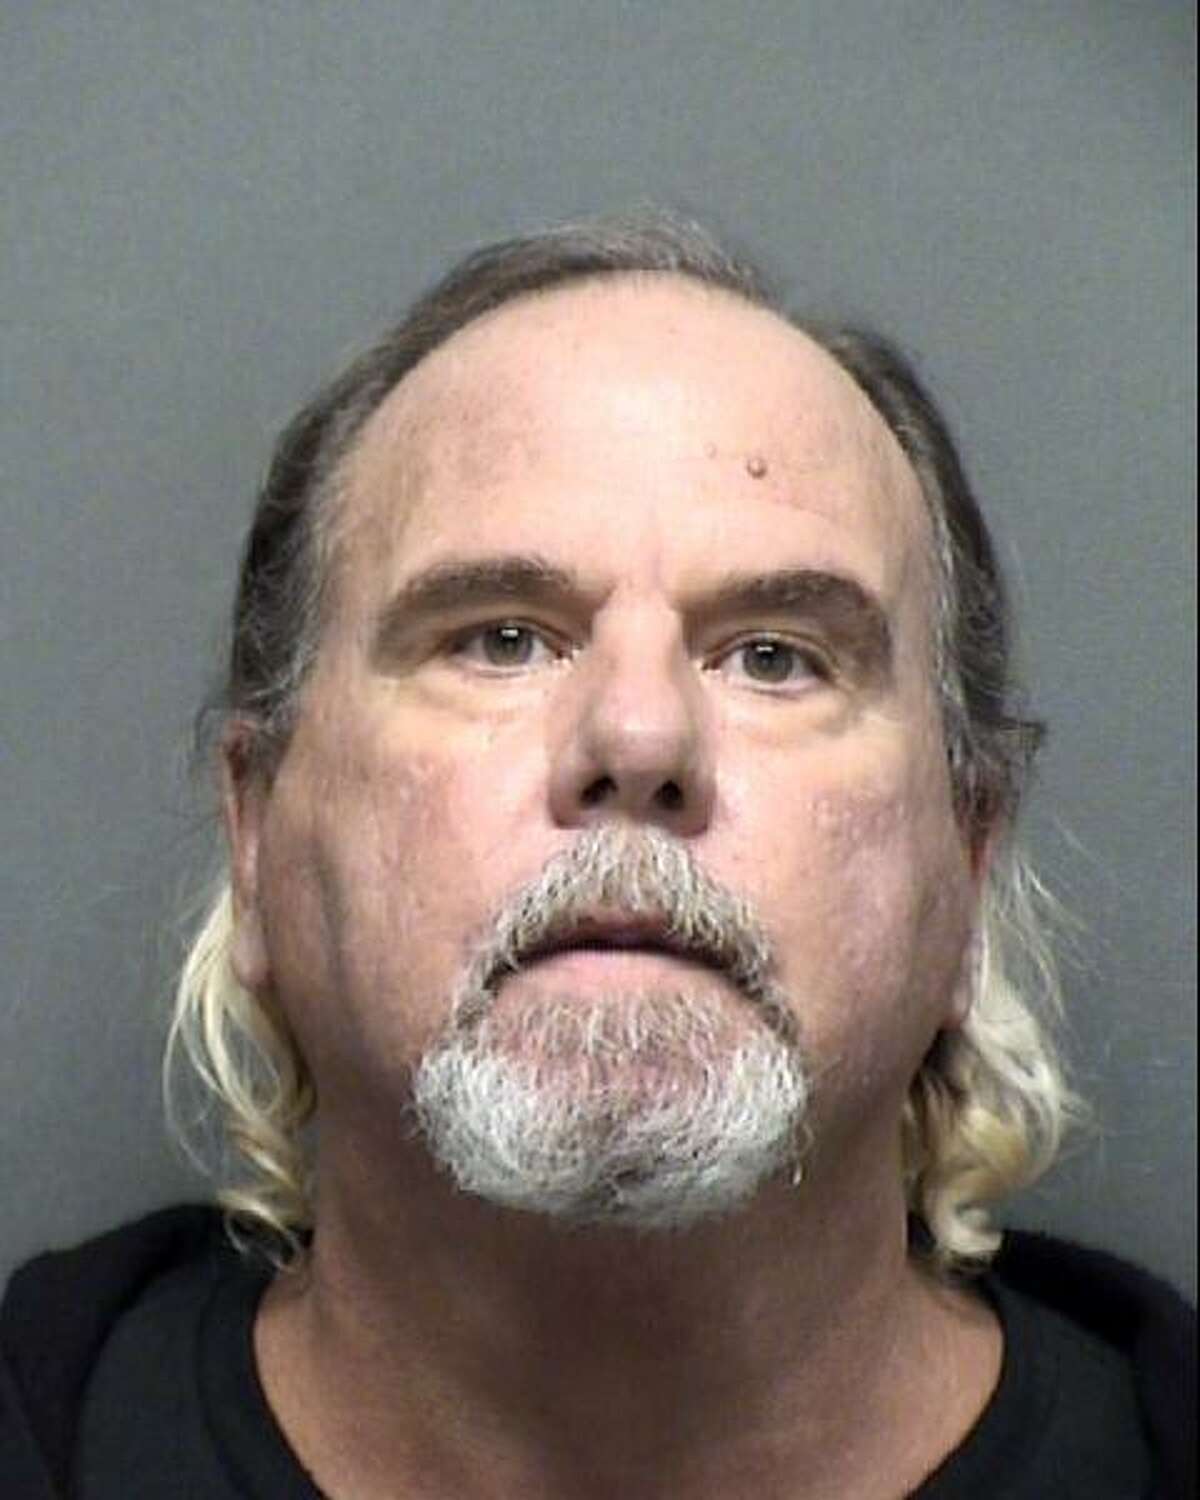 John Edward Schiller, 57, was charged with aggravated assault with a deadly weapon following a fight over a cellphone.